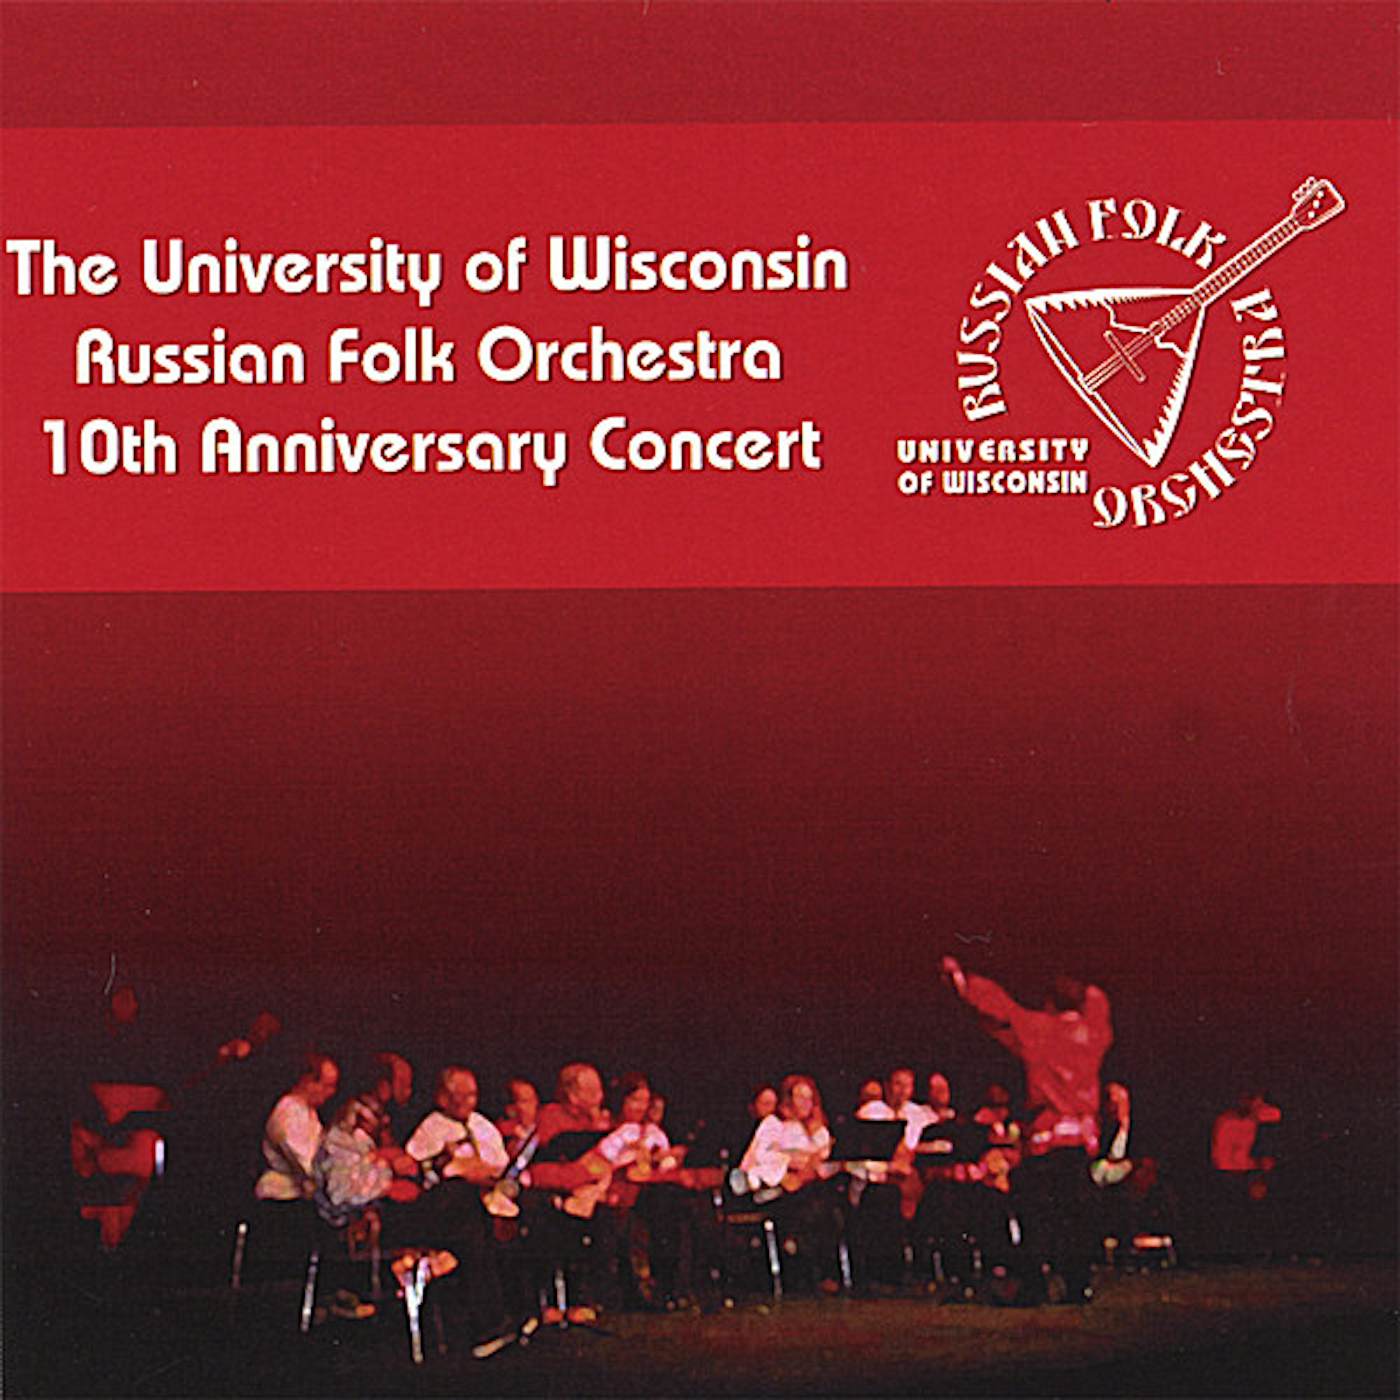 University Of Wisconsin Russian Folk Orchestra 10TH ANNIVERSARY CONCERT CD